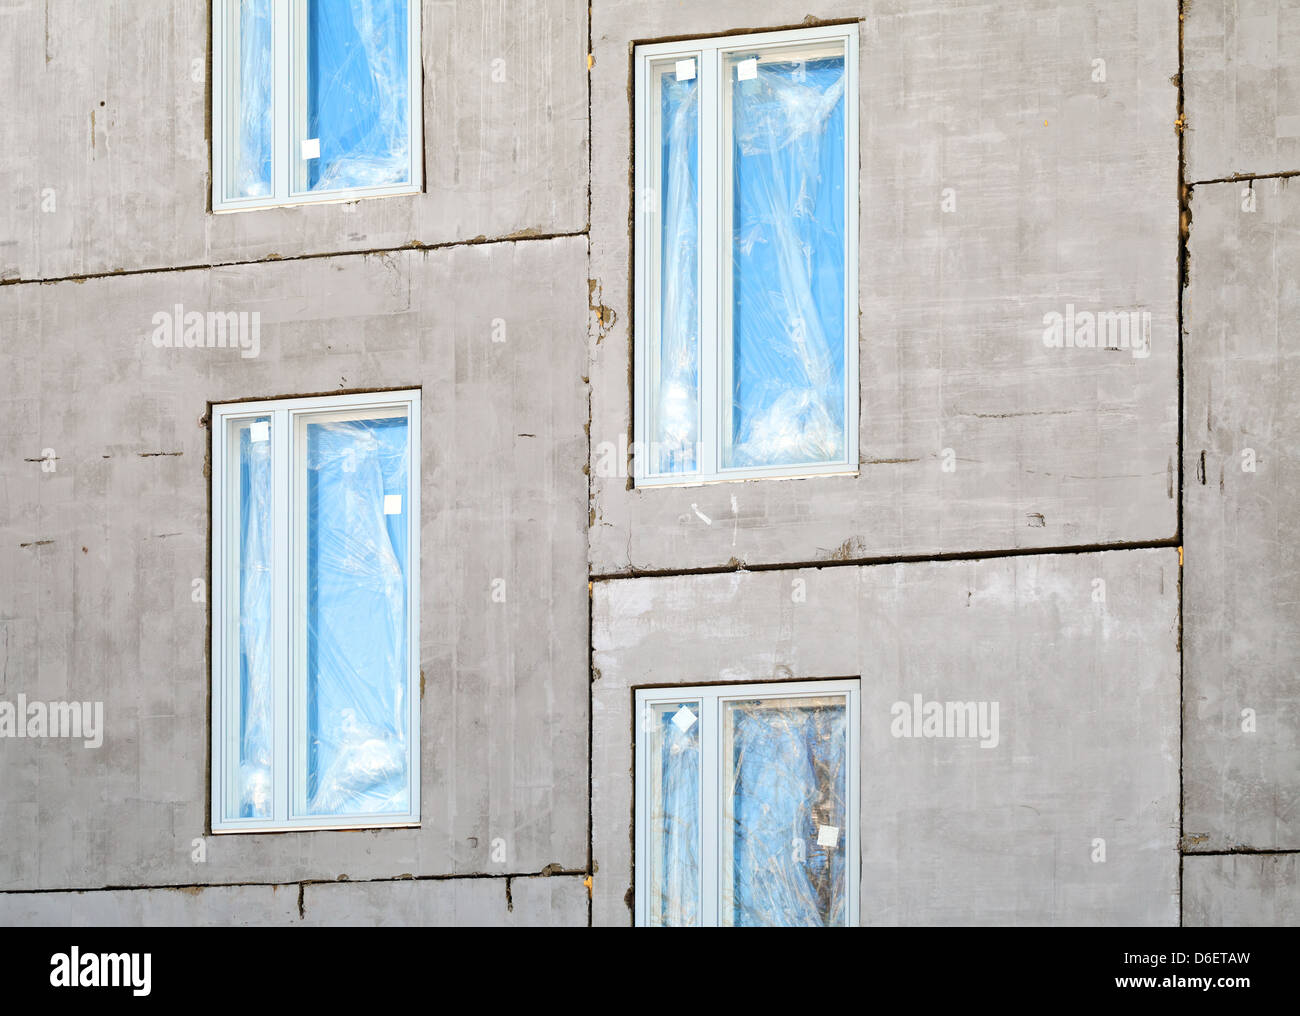 Unfinished building concrete wall with windows. Under construction Stock Photo